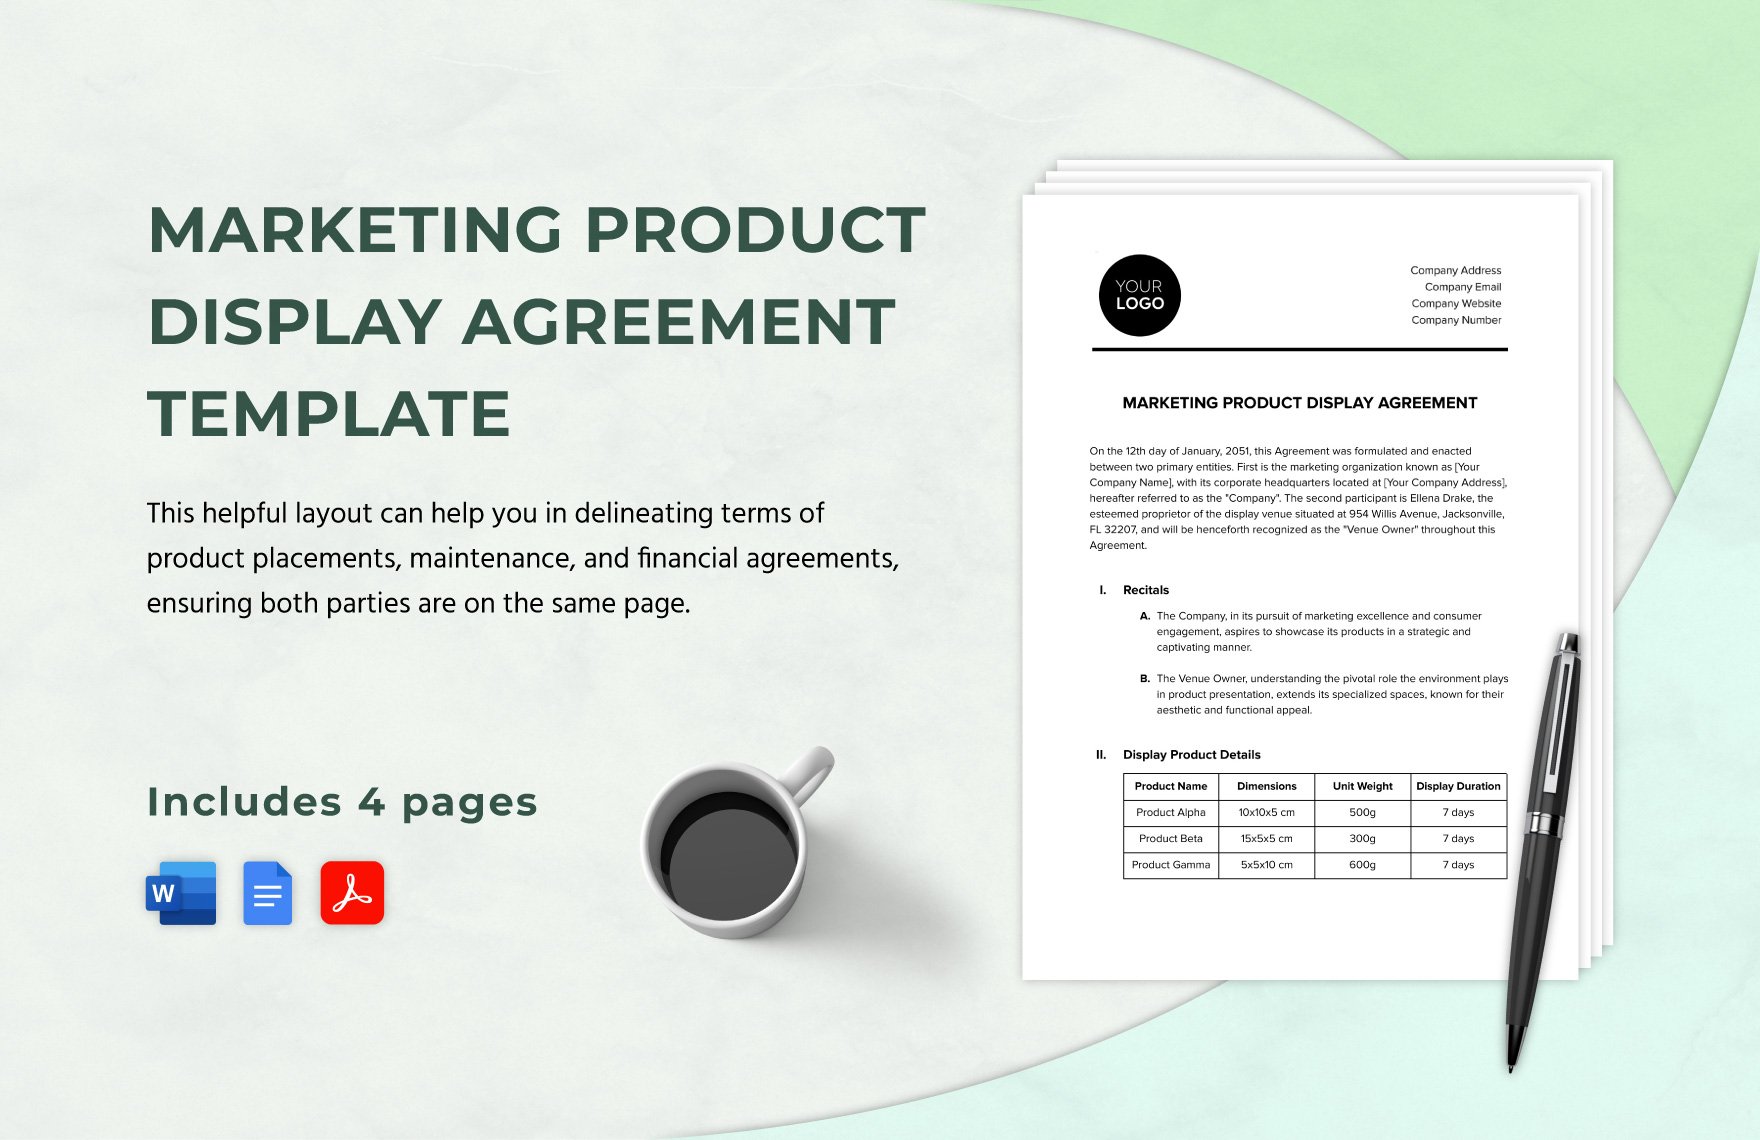 Marketing Product Display Agreement Template in Word, Google Docs, PDF